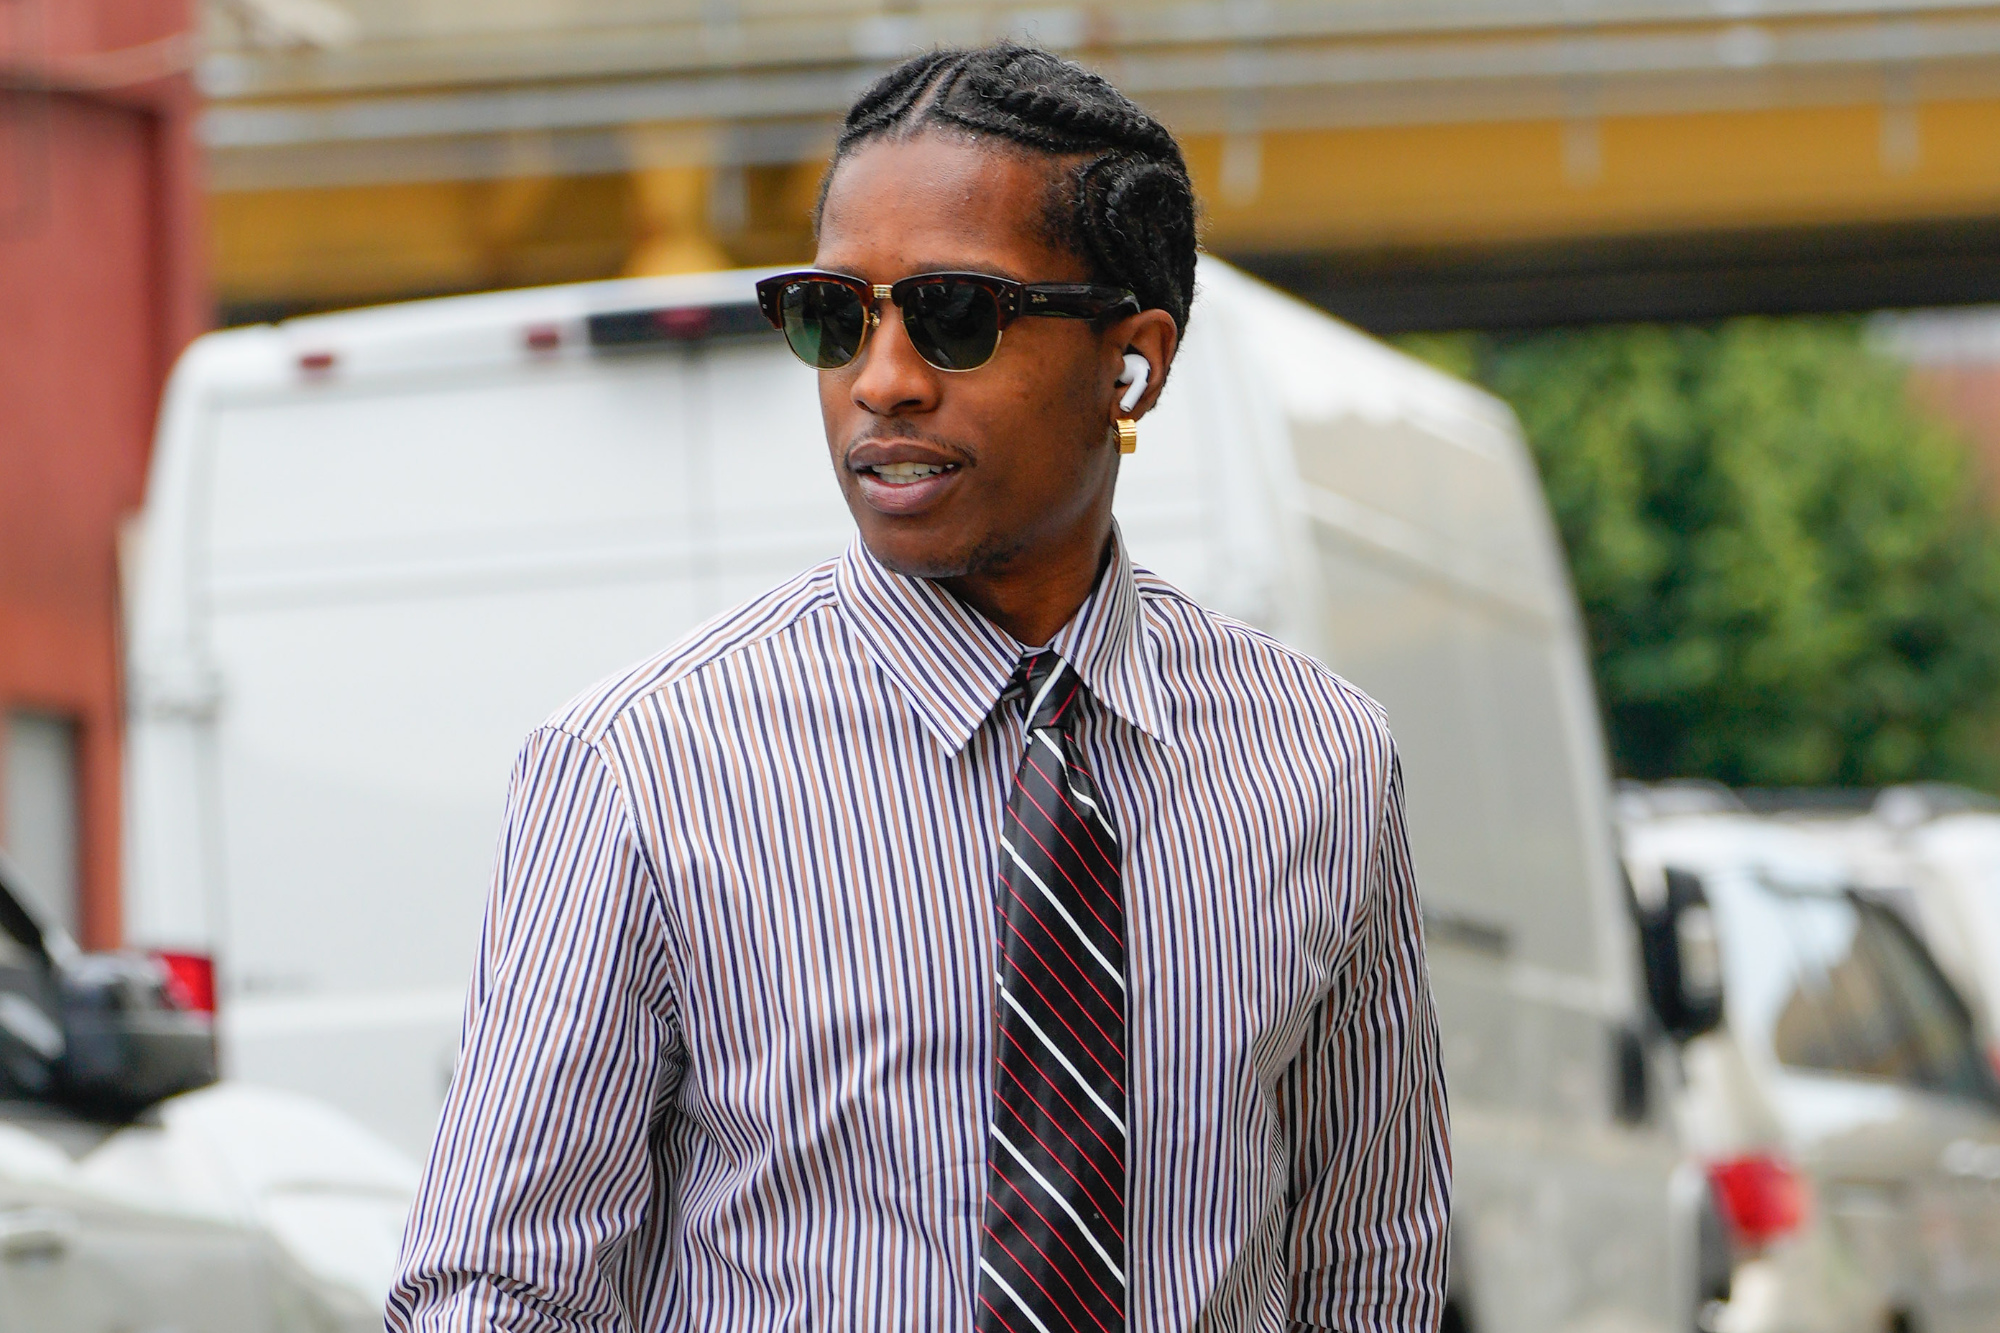 A$AP Rocky wearing a tie and jeans in NYC